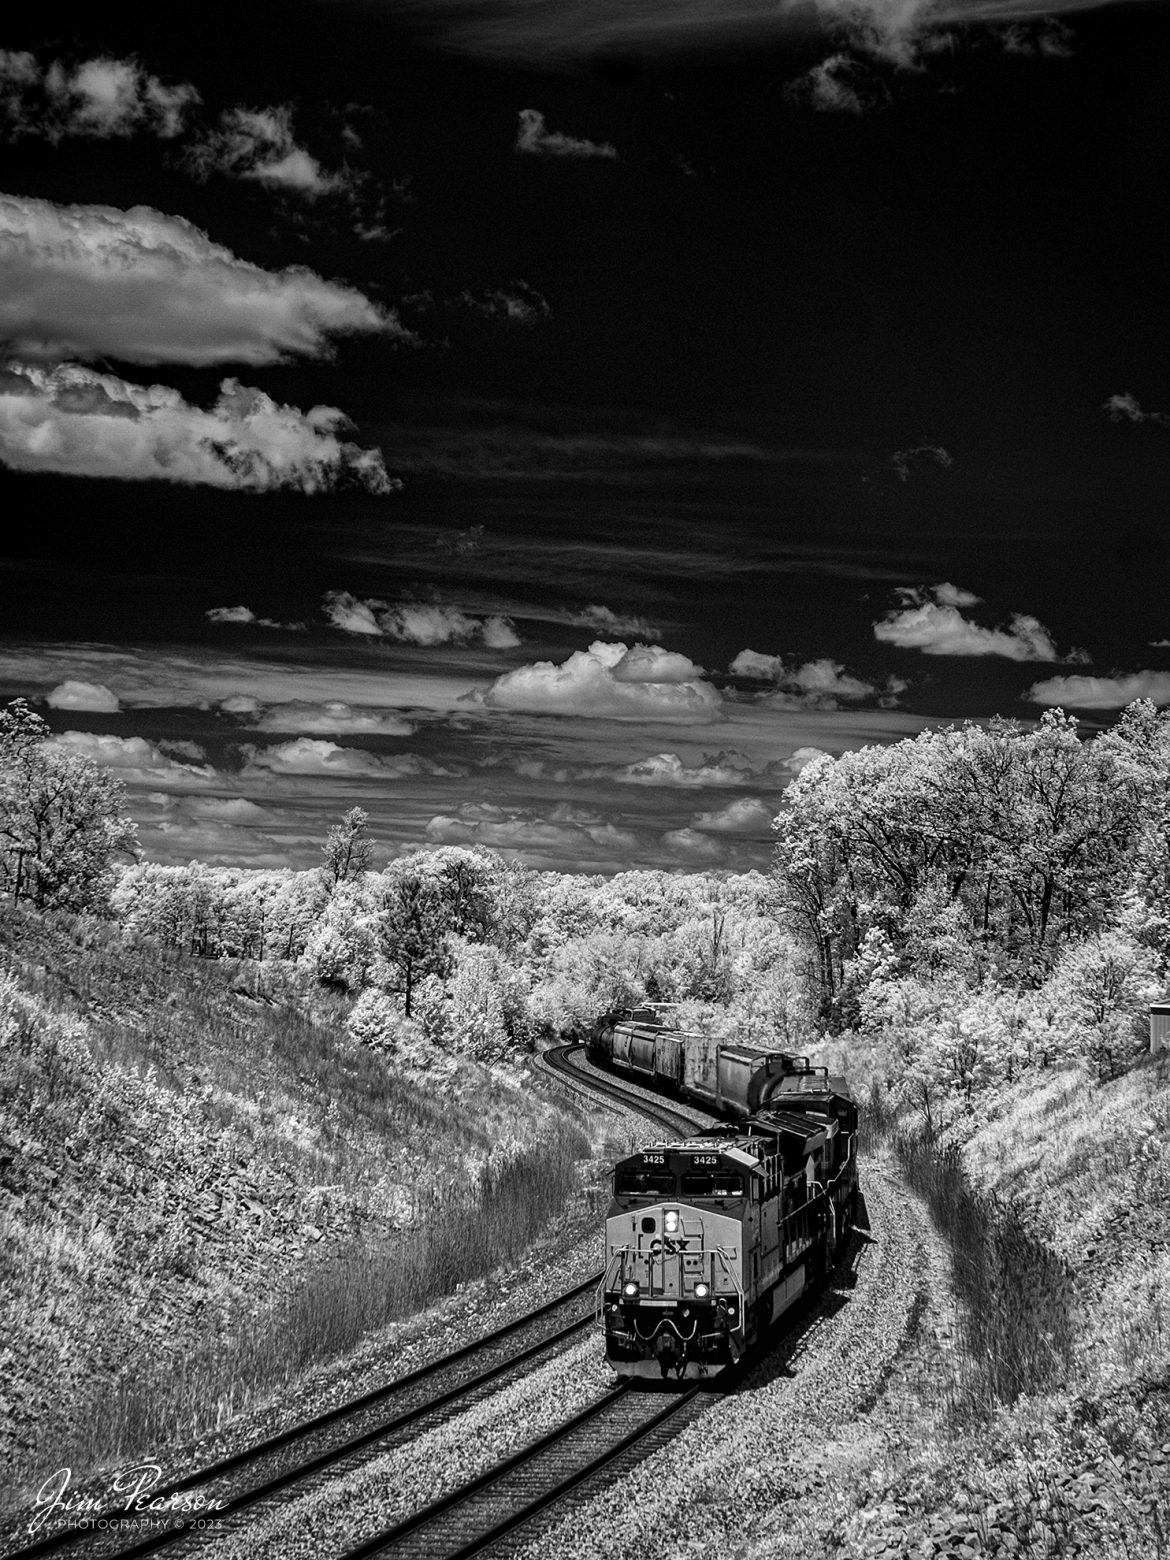 This week’s Saturday Infrared photo is of CSX M647 as it passes through the S curve at Nortonville, Ky as they head south on the CSX Henderson Subdivision on May 2nd, 2023. This train runs daily between Clearing Yard at Chicago, IL, and Rice Yard at Waycross, GA.

Tech Info: Fuji XT-1, RAW, Converted to 720nm B&W IR, Sigma 24-70mm @32mm, f/5, 1/500, ISO 200.

#trainphotography #railroadphotography #trains #railways #jimpearsonphotography #infraredtrainphotography #infraredphotography #trainphotographer #railroadphotographer #csxrailroad #csxhendersonsubdivision